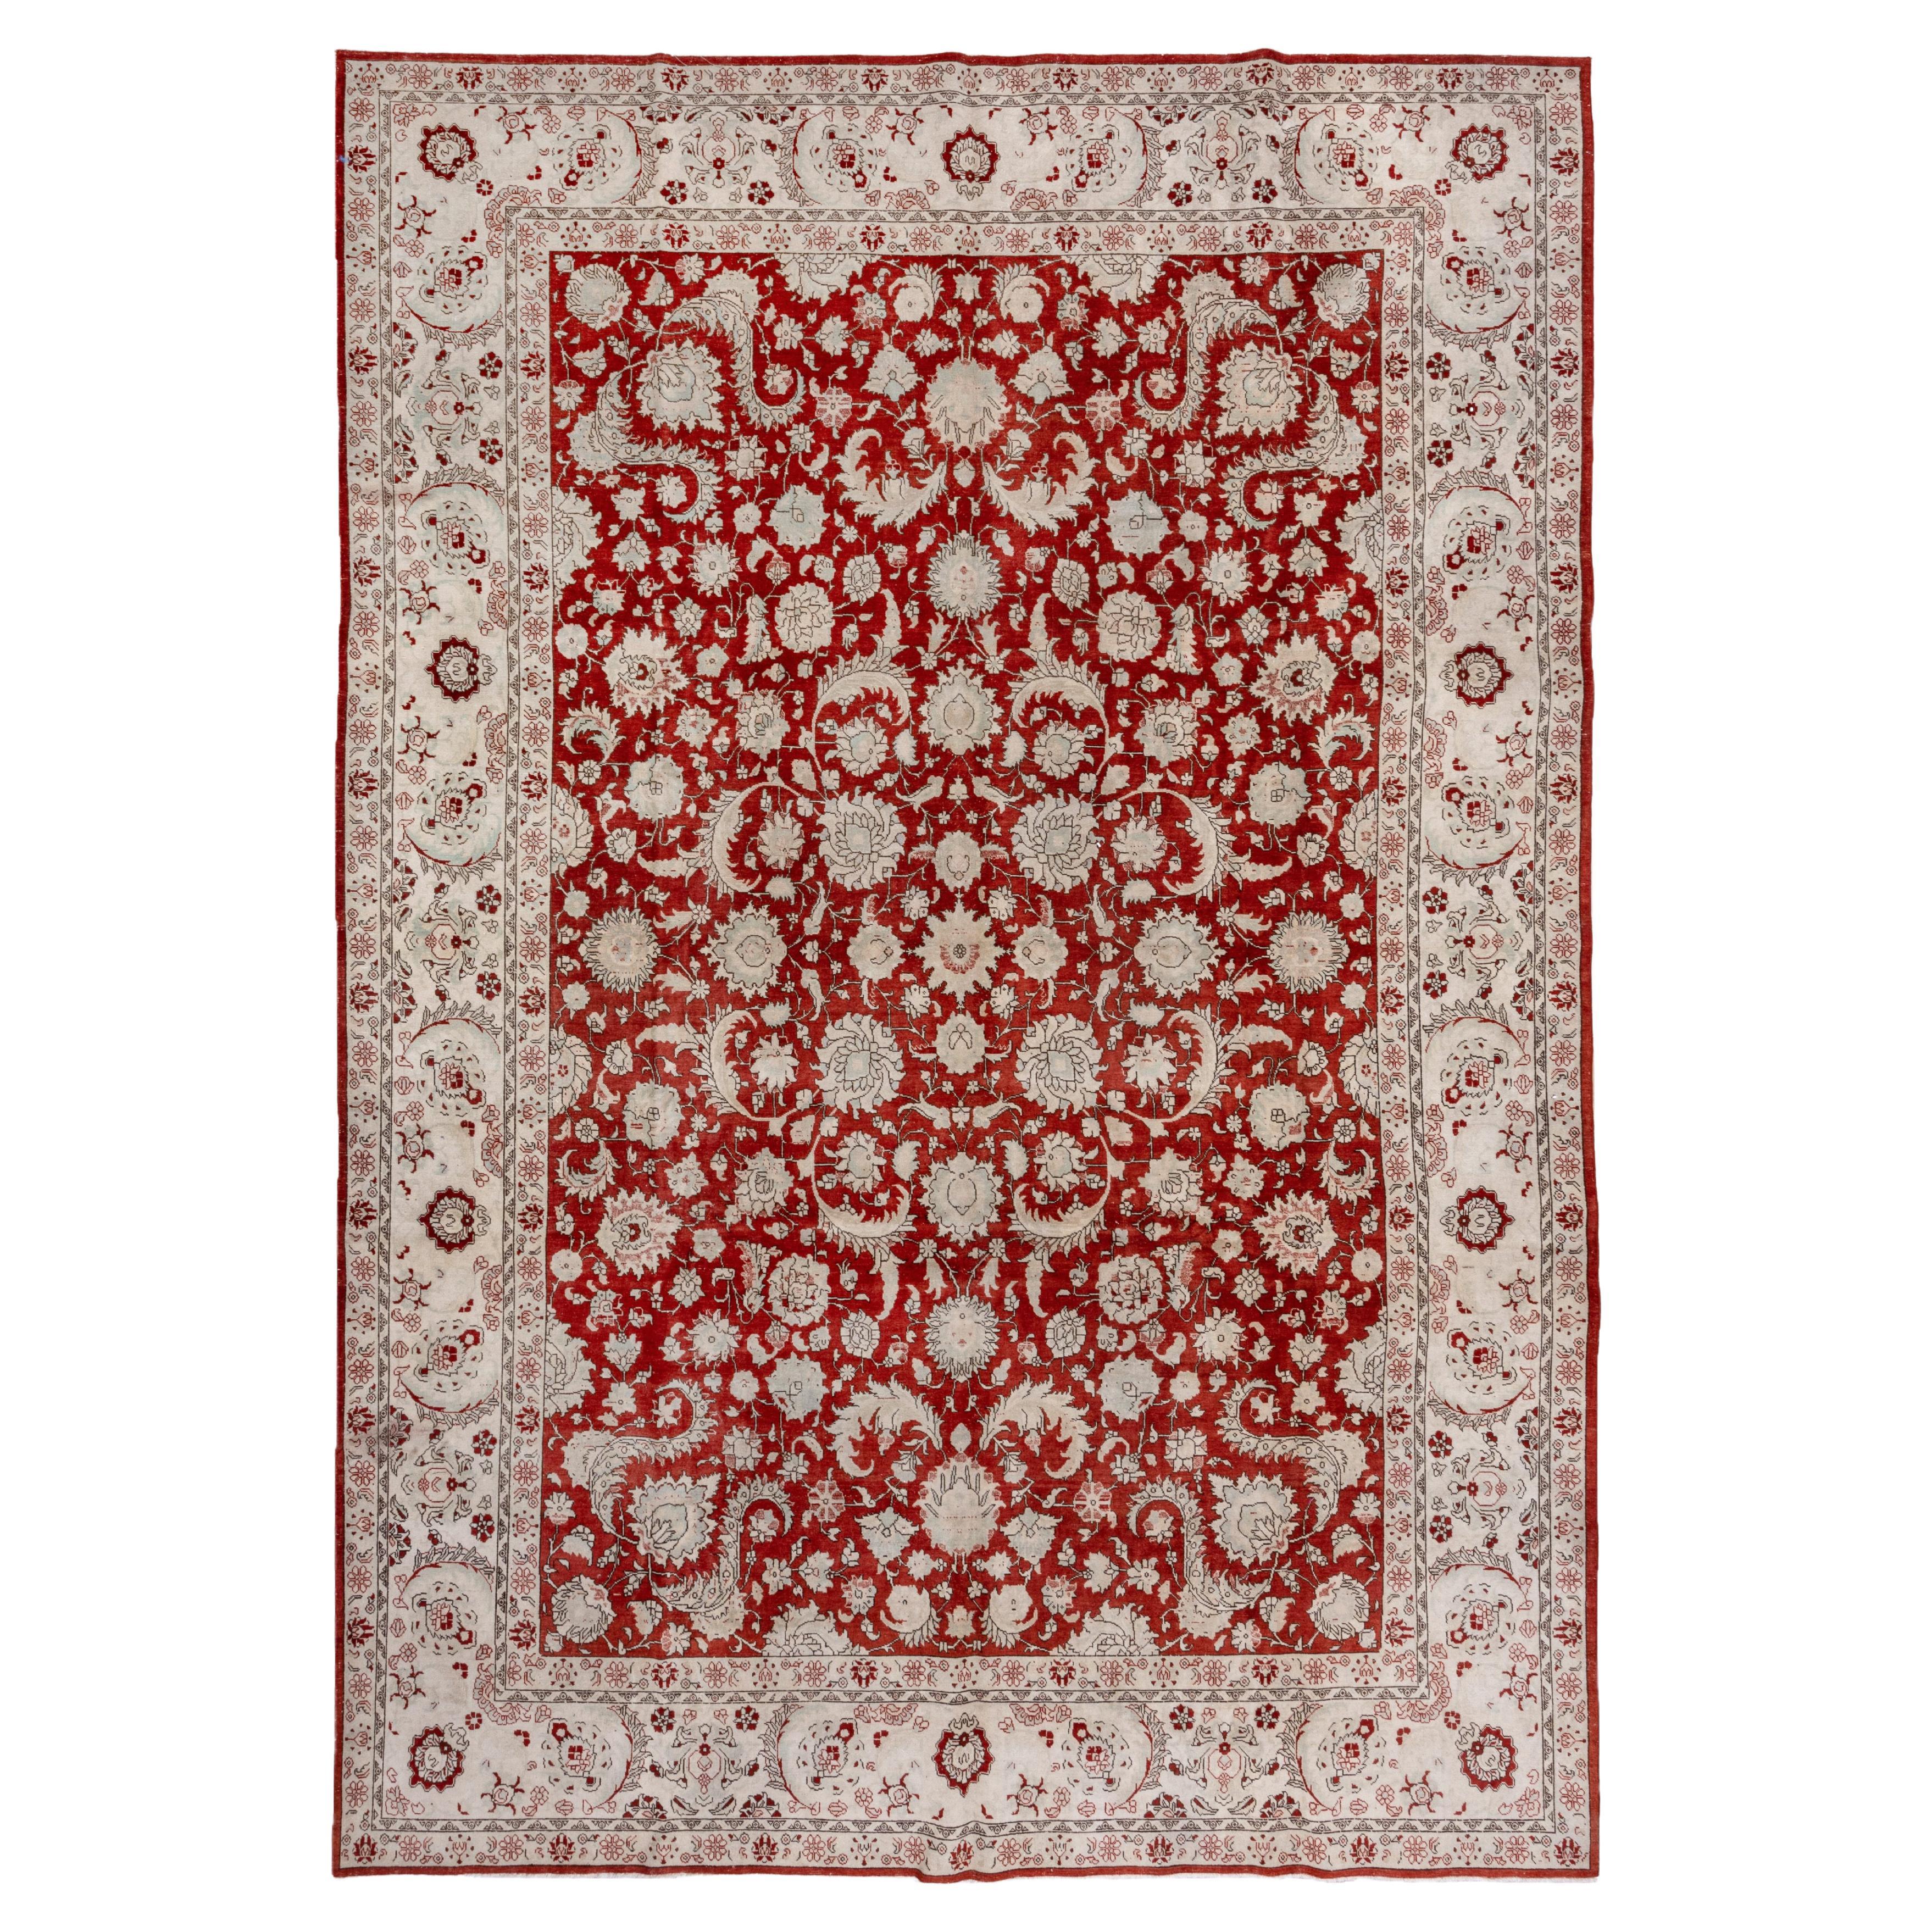 Antique Persian Tabriz Rug with a Red Allover Field